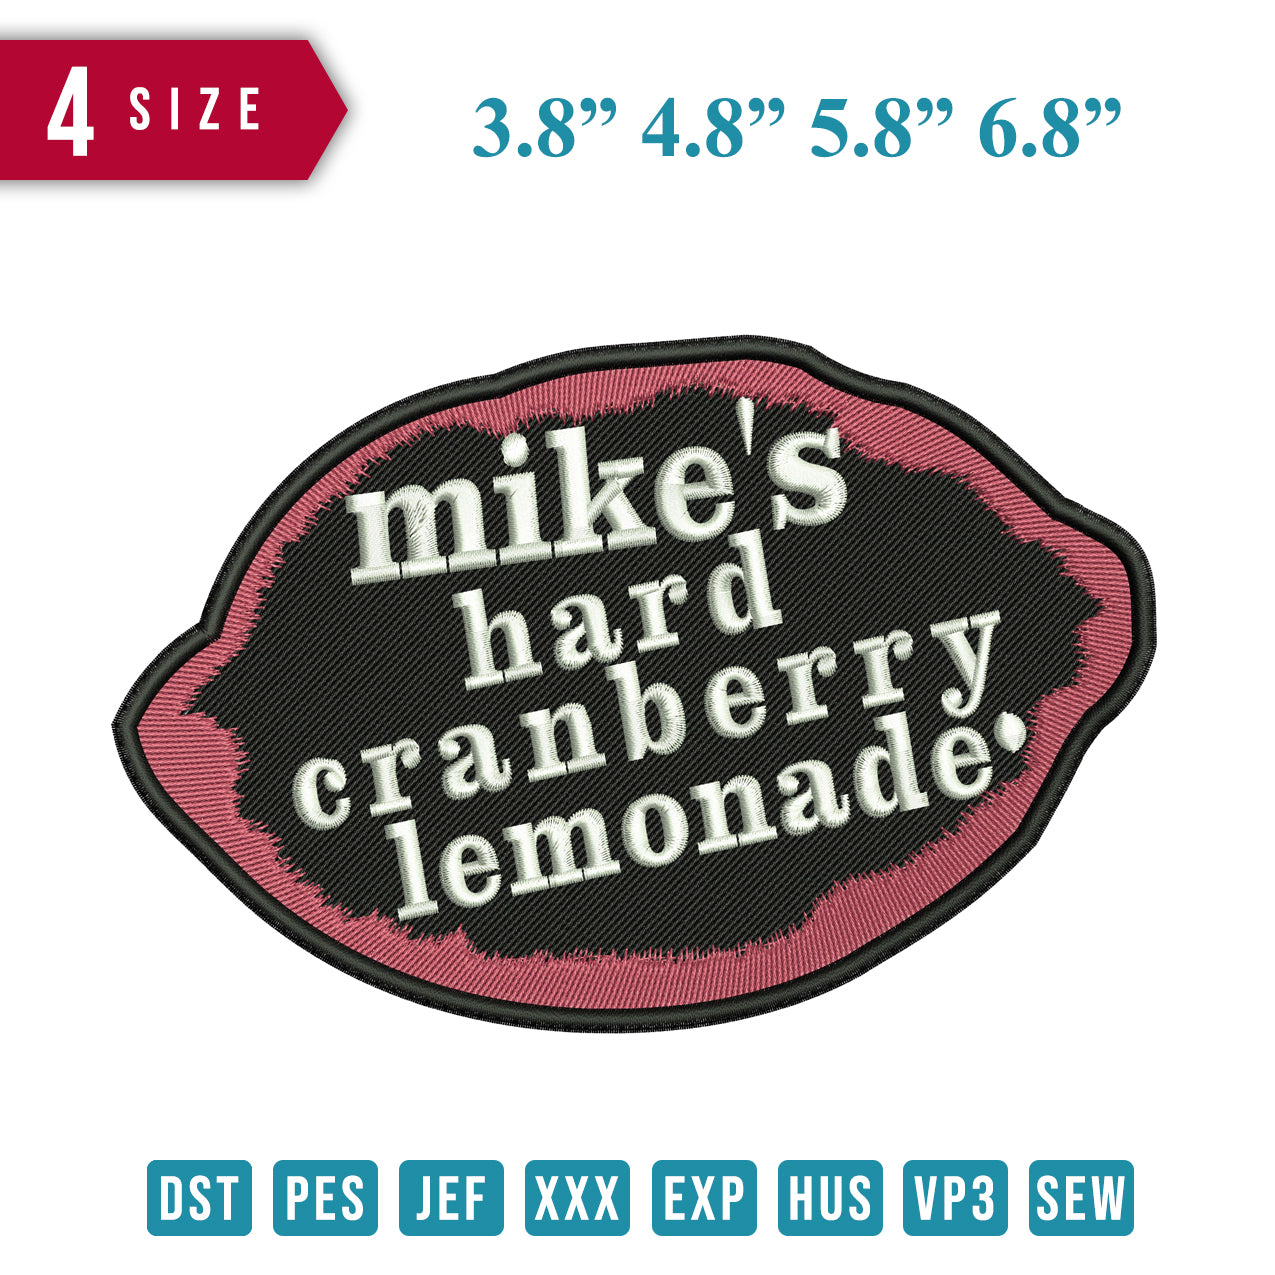 Mike's Hard Cranberry